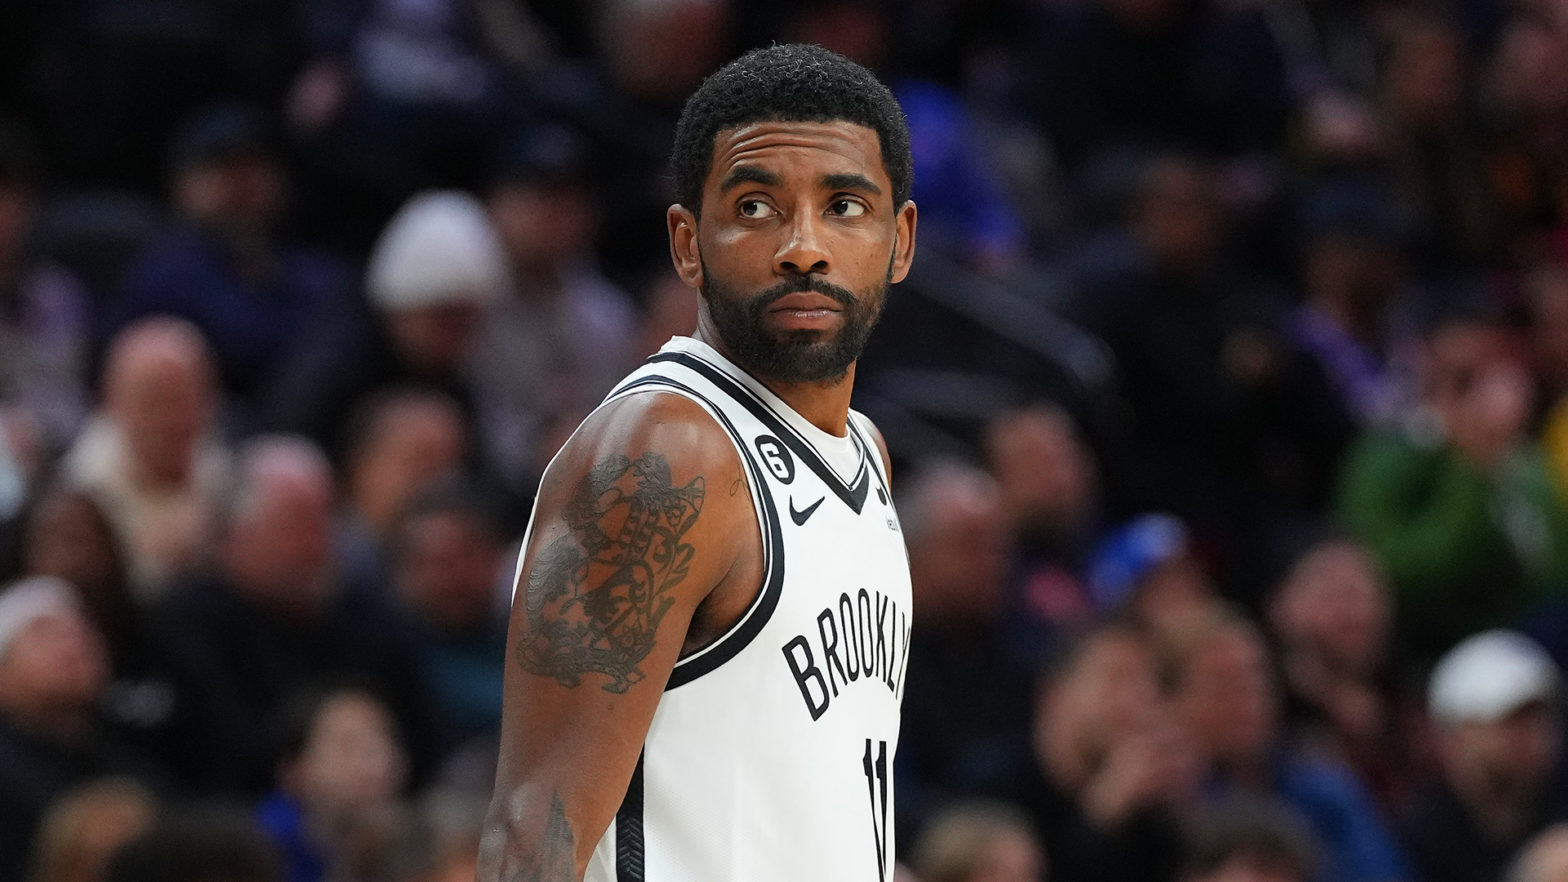 After An 11-Year Endorsement Deal, Nike Has Dropped Brooklyn Nets Star Kyrie Irving